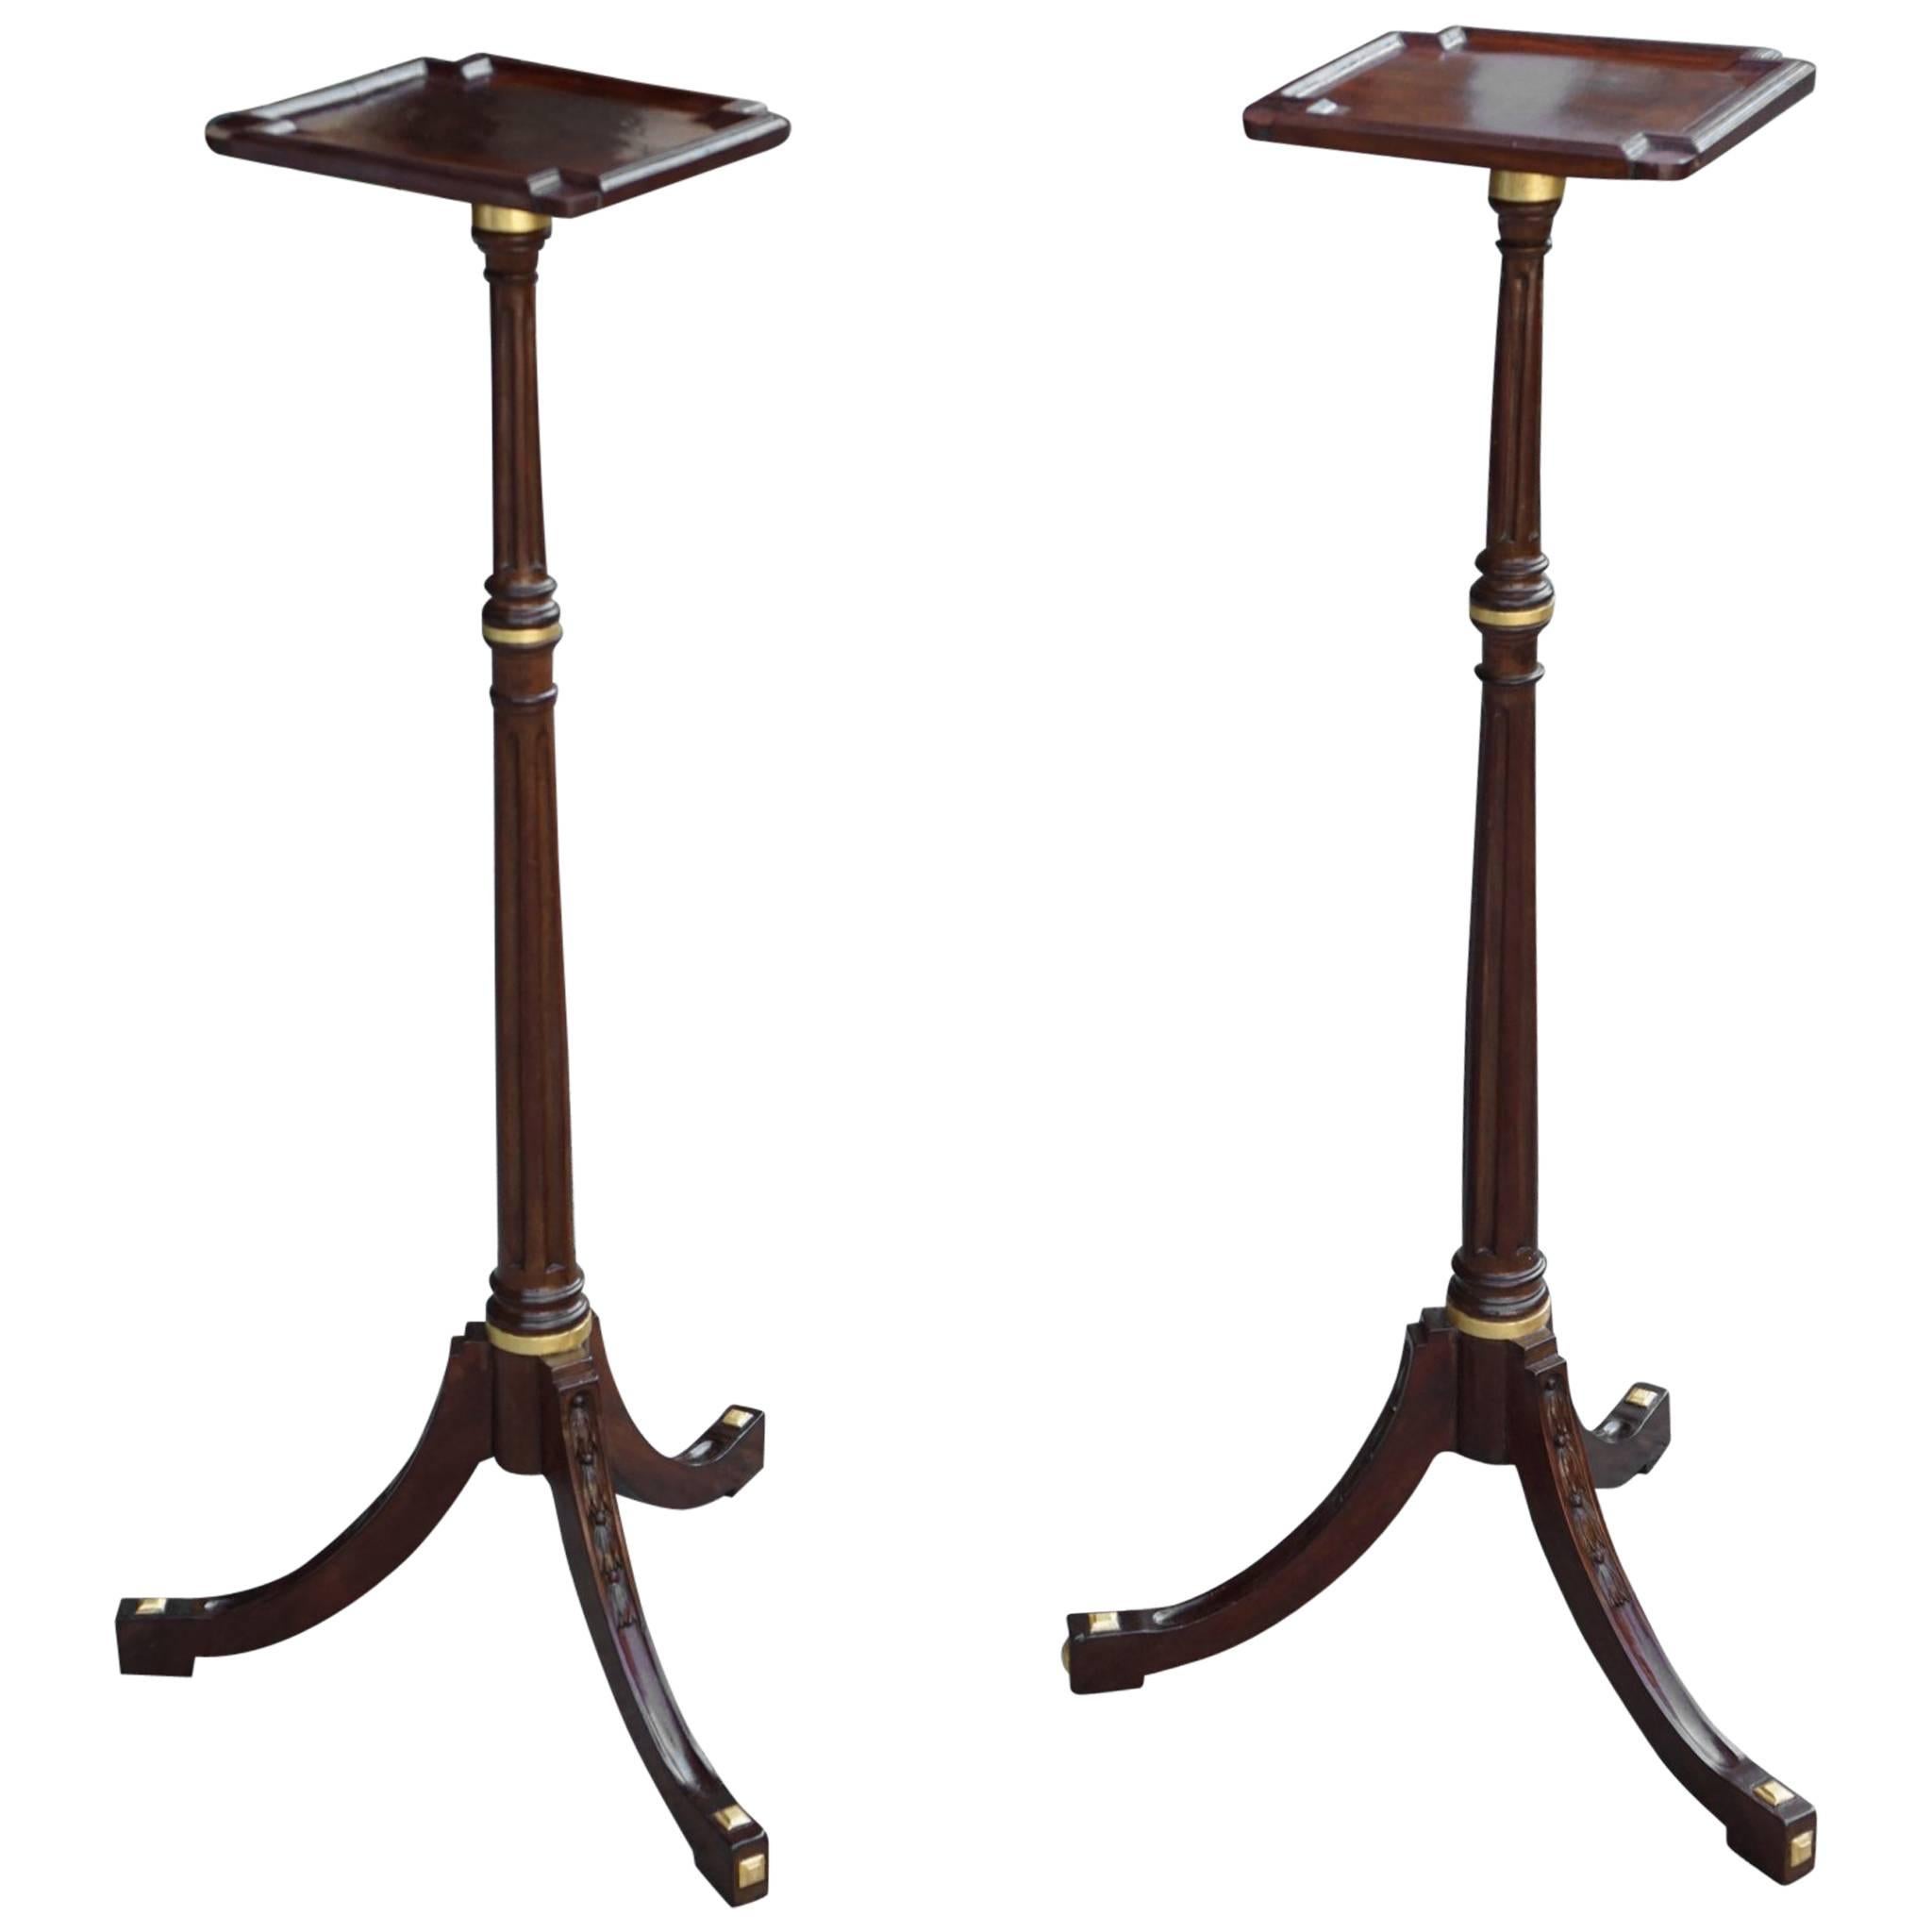 Pair of Period George III Carved and Gilded Mahogany Plant or Candle Stands